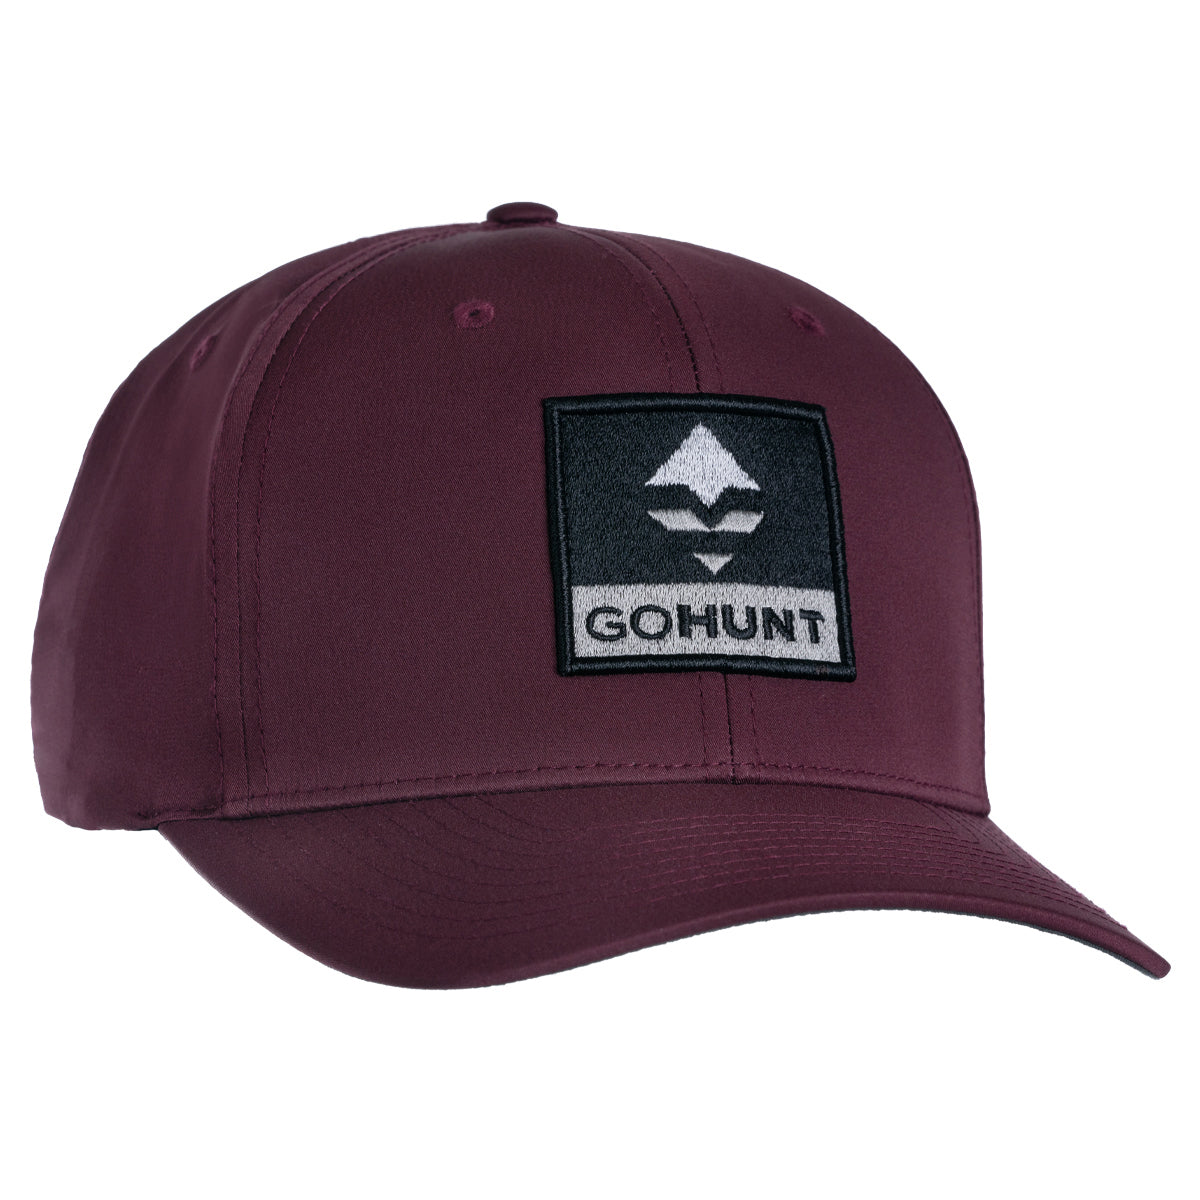 GOHUNT Stacked in  by GOHUNT | GOHUNT - GOHUNT Shop